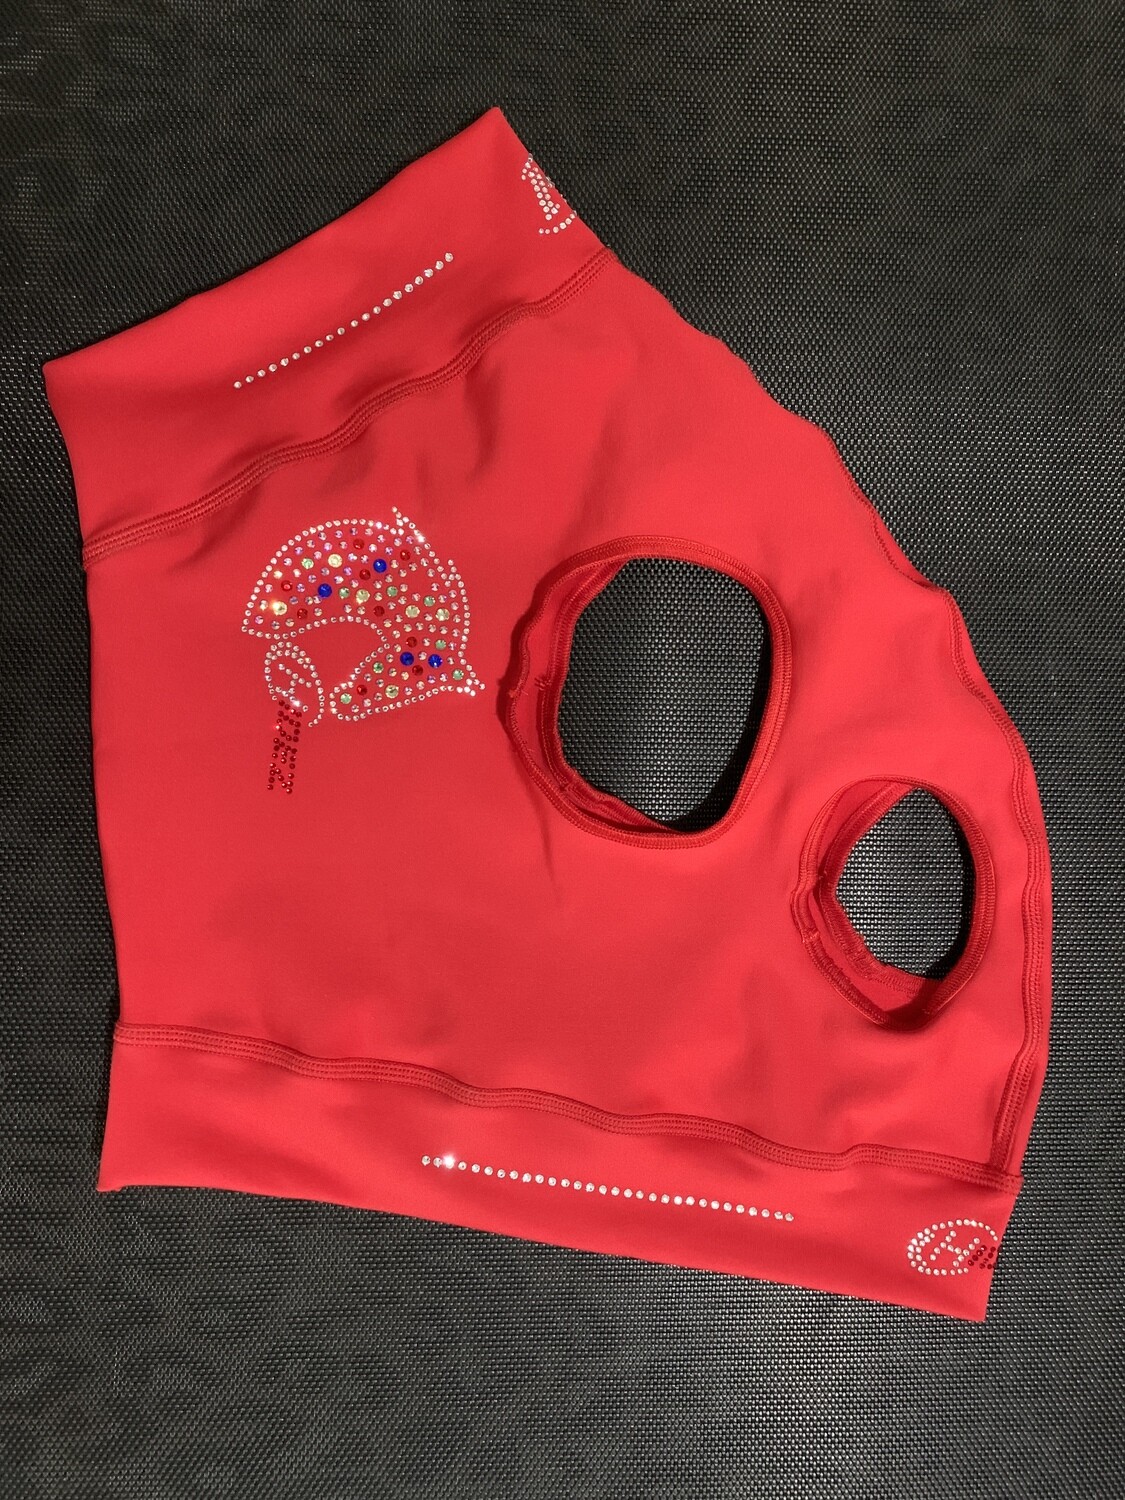 Red Medium Mask With Bling - in stock now